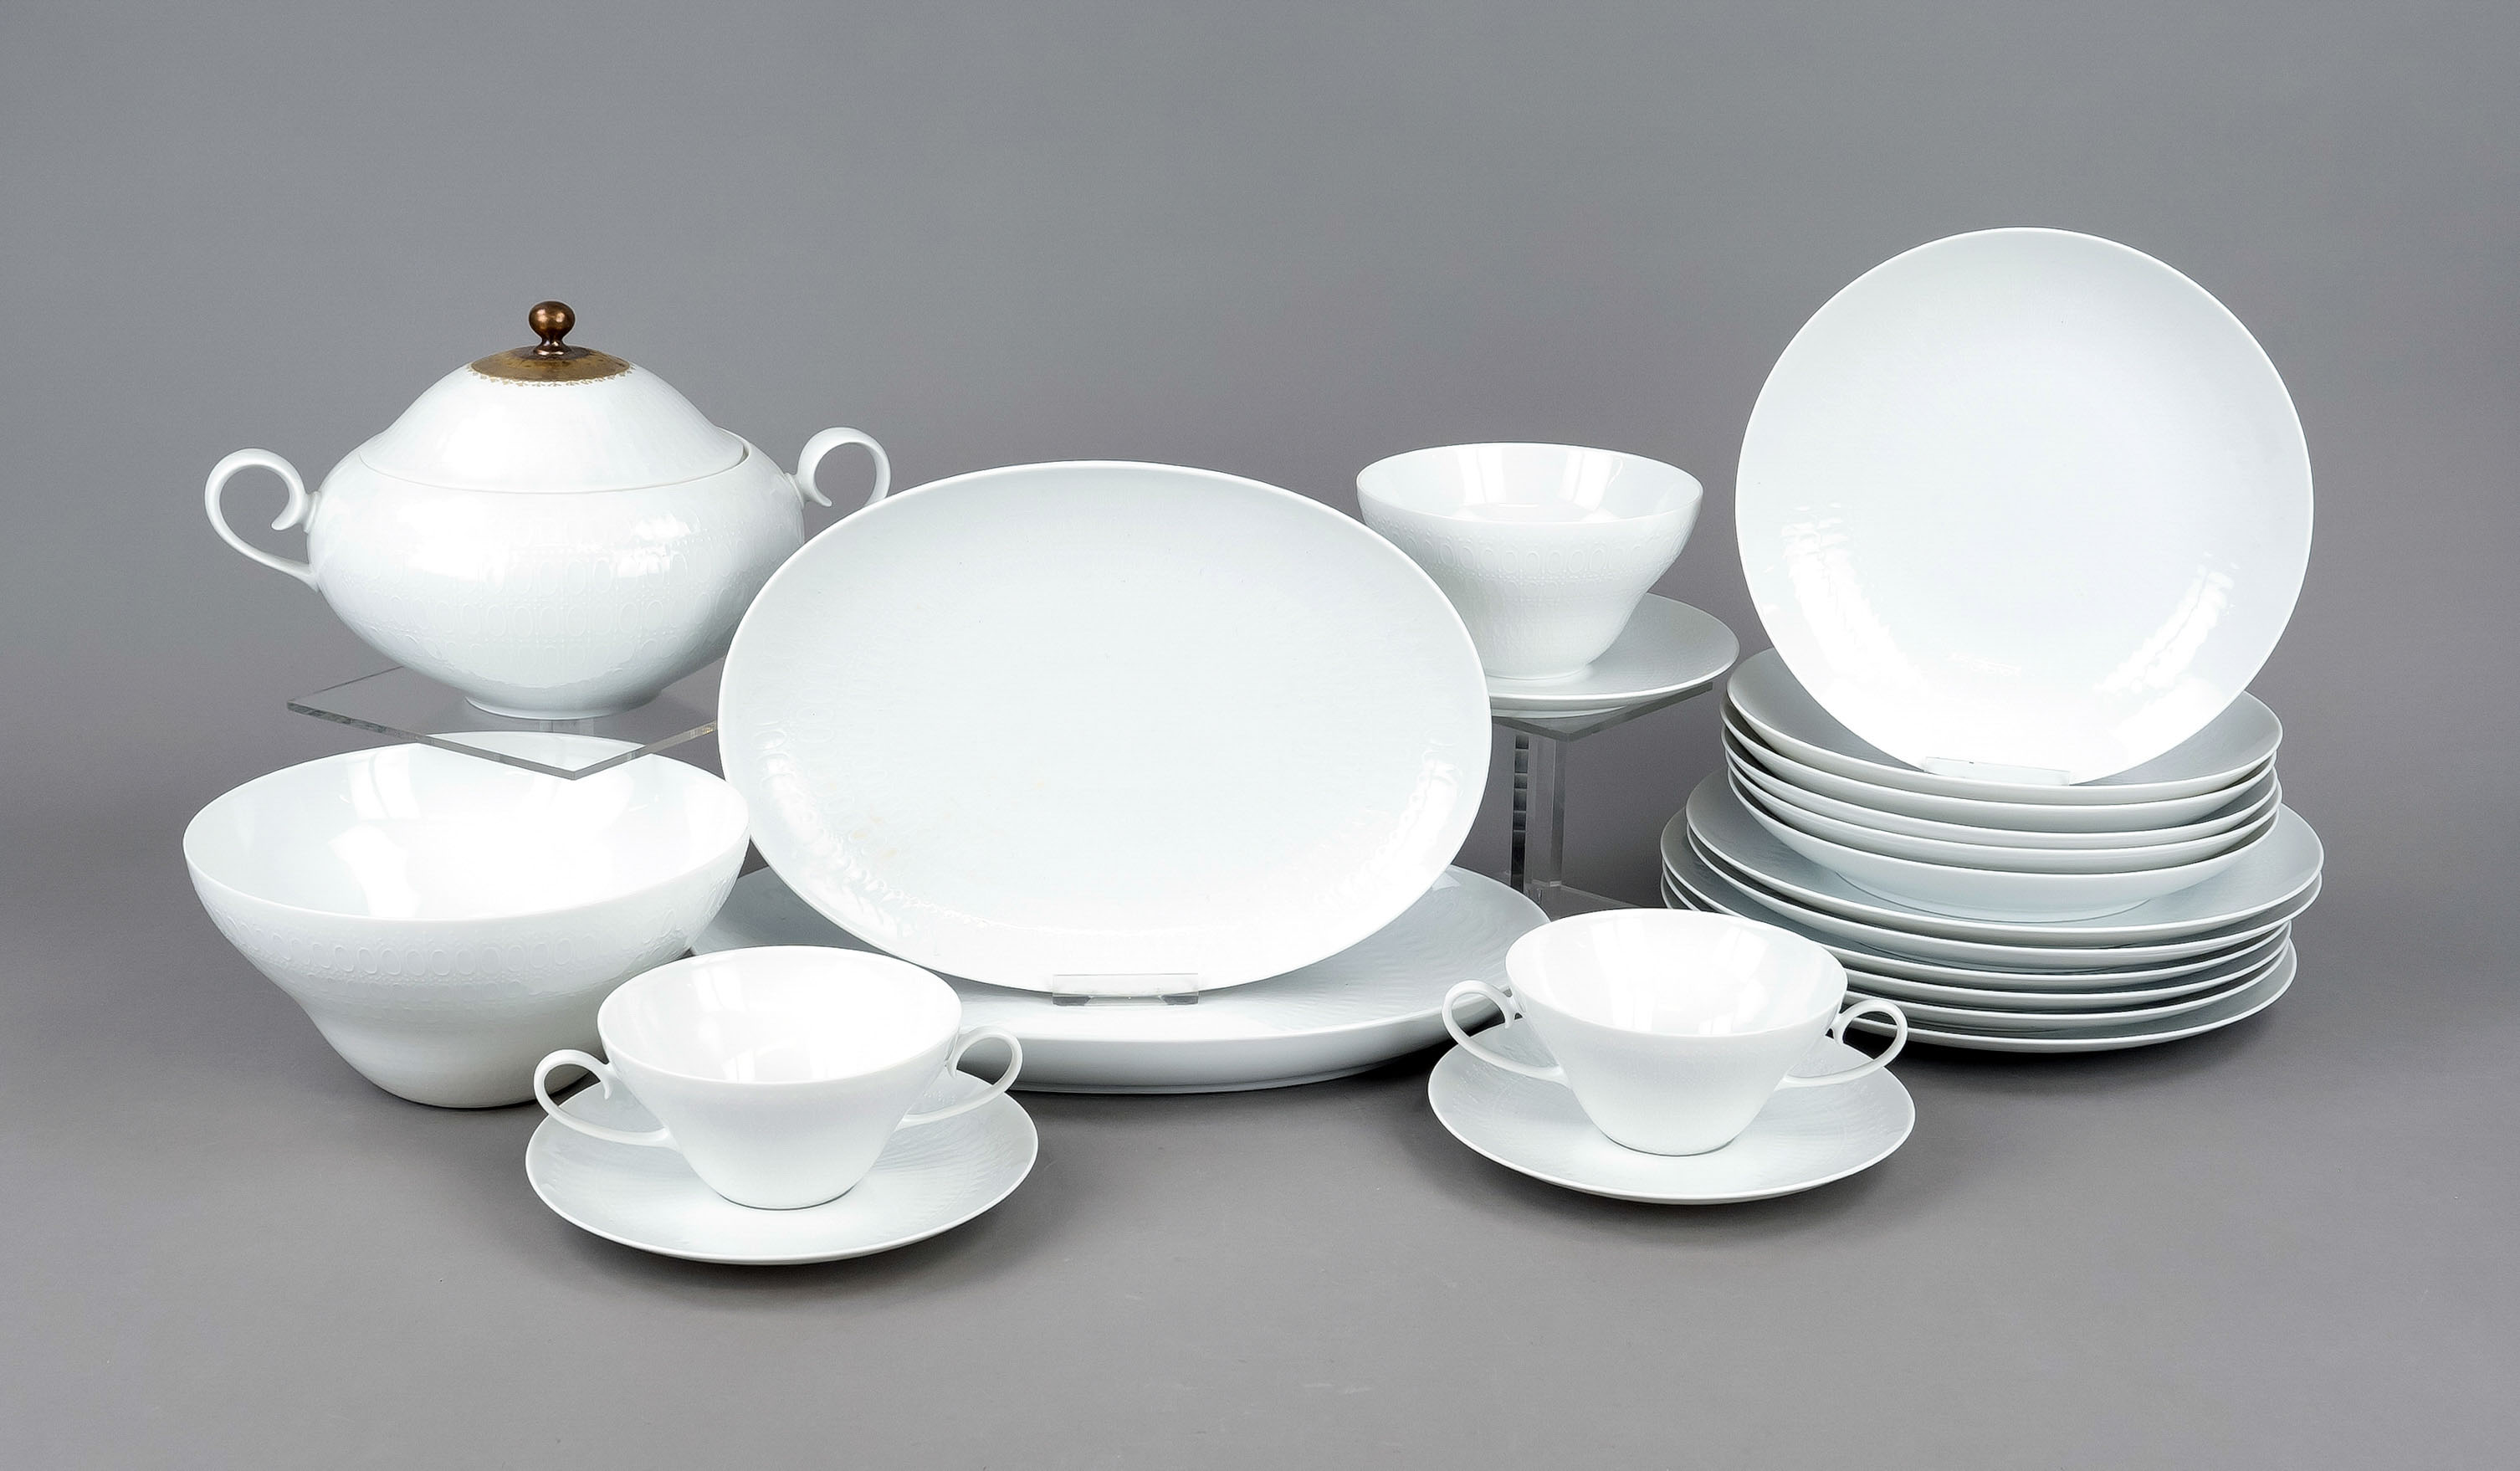 Dinner service for 6 persons, 30 pcs, Rosenthal, Studio-Line, mark after 1961, form Romance, white